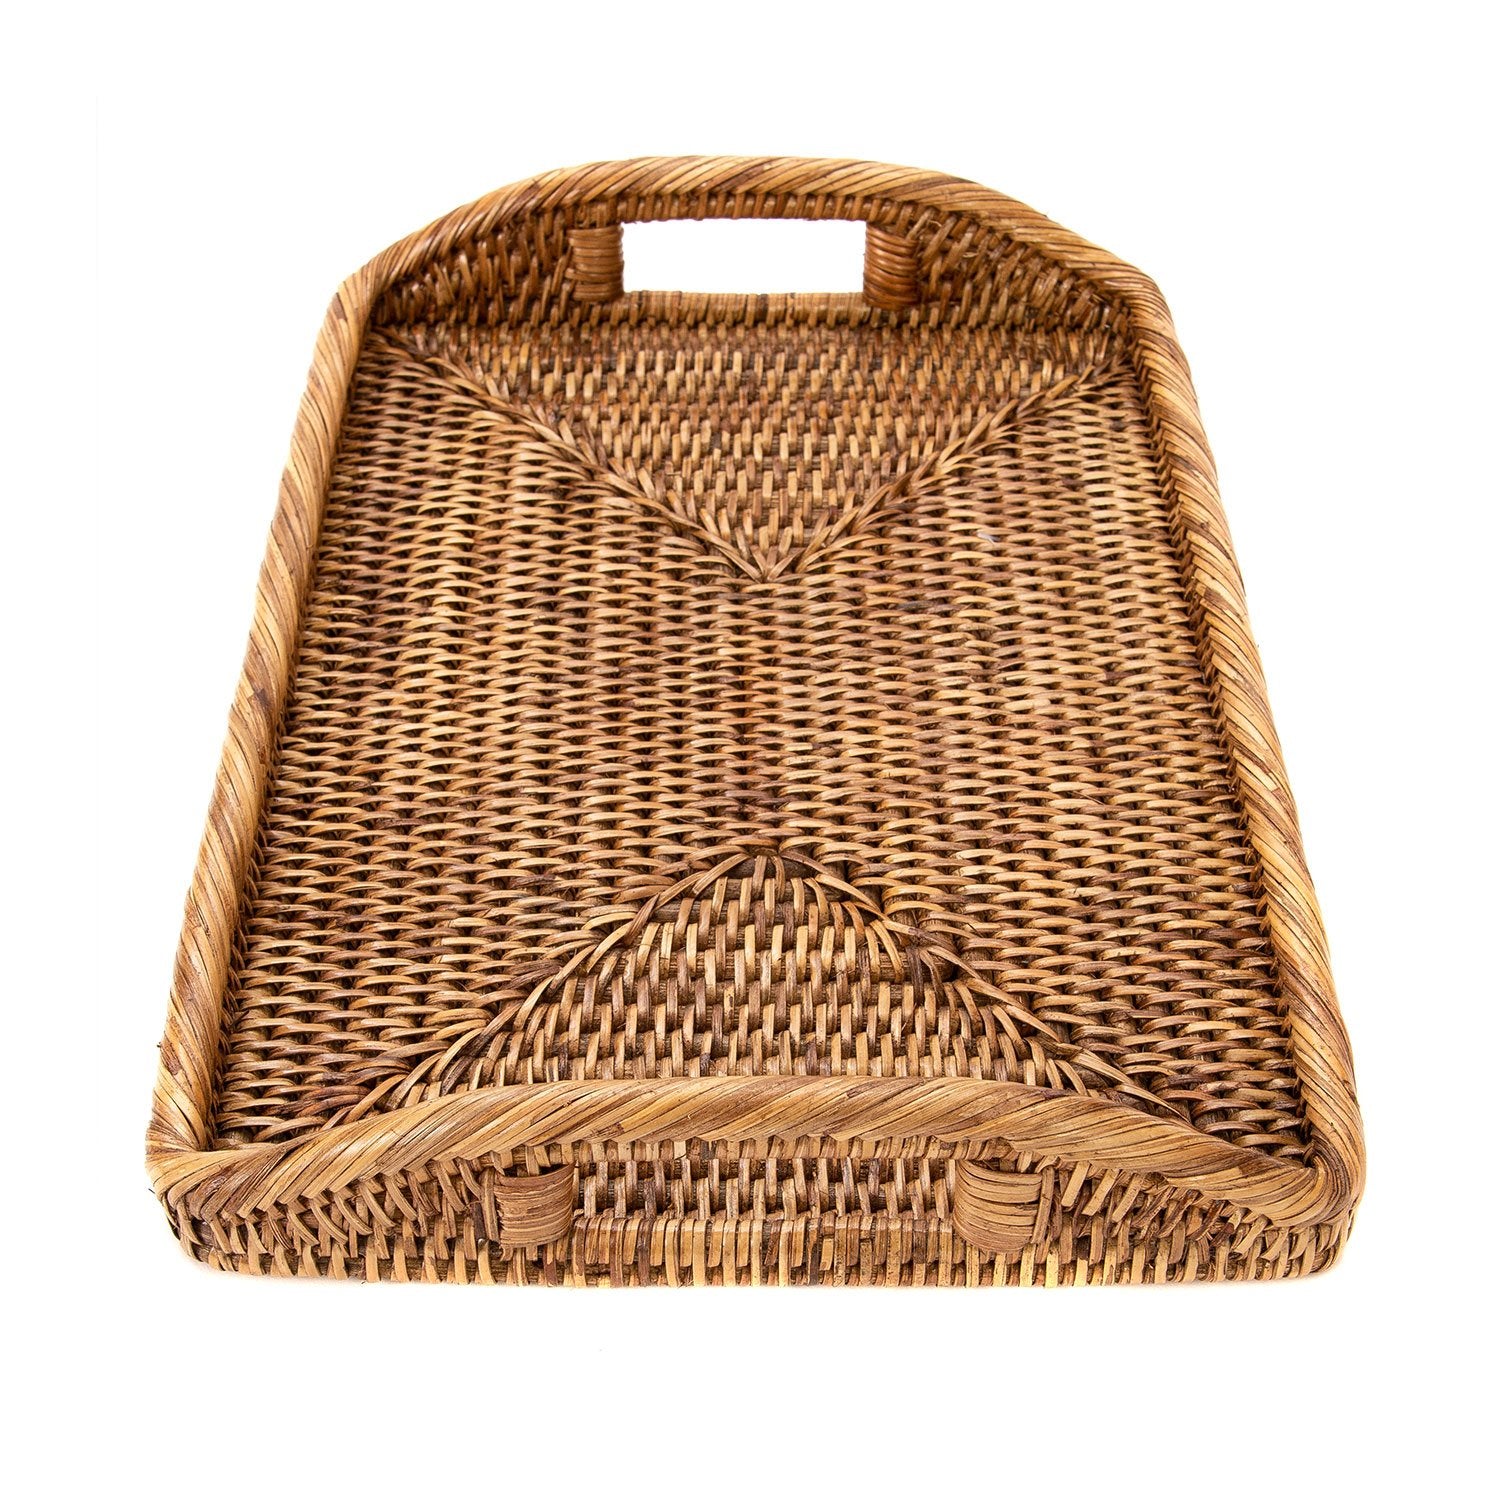 Small Woven Tray with Handles in Honey